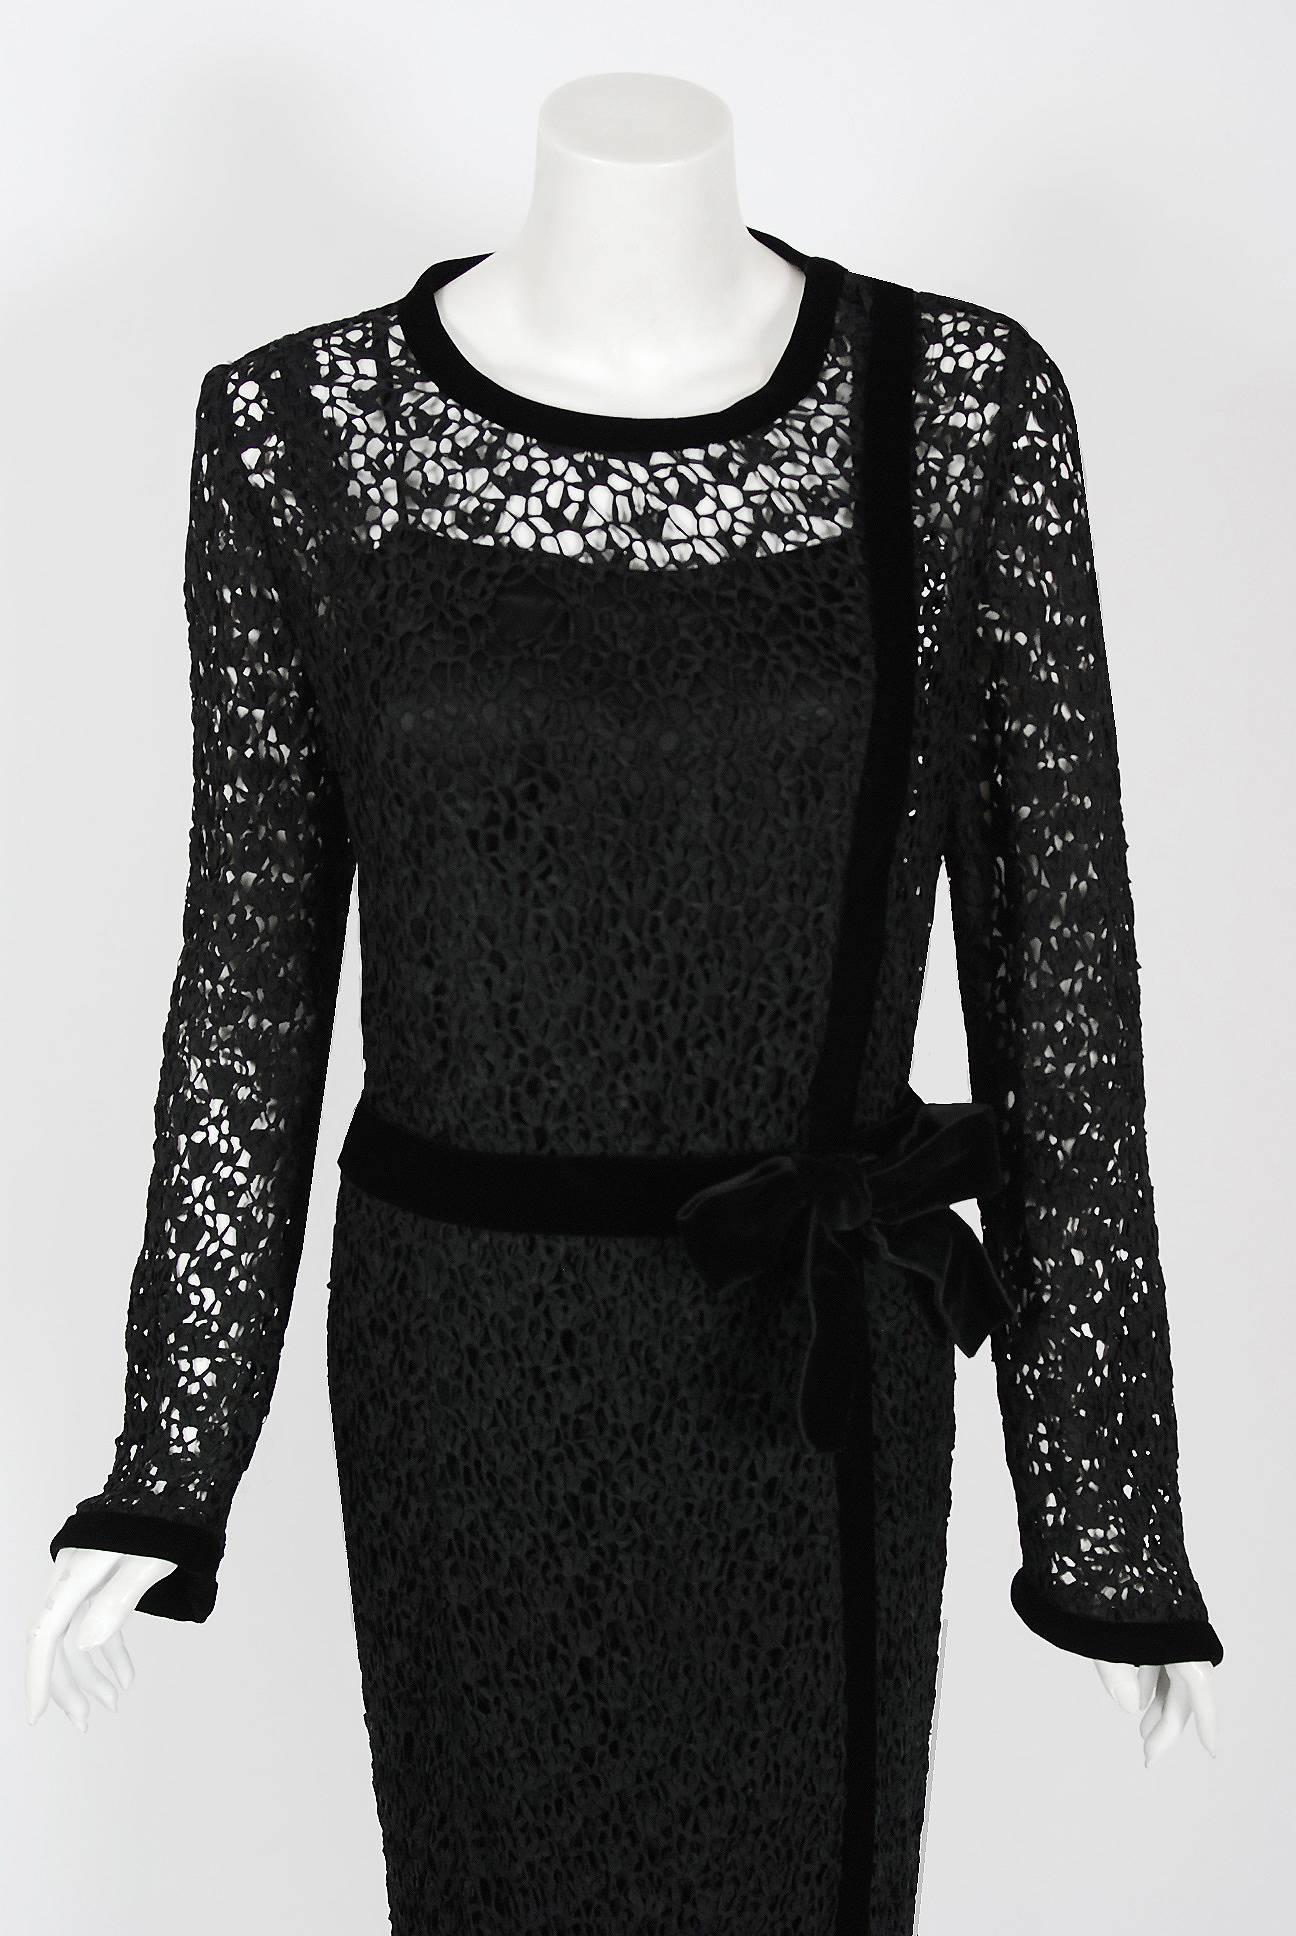 Chanel is known to be one of the most luxurious and decadent fashion houses in the world. This breathtaking black guipure crochet-lace and velvet cocktail dress from their 1973 Fall/Winter collection is a perfect example of why this couture brand